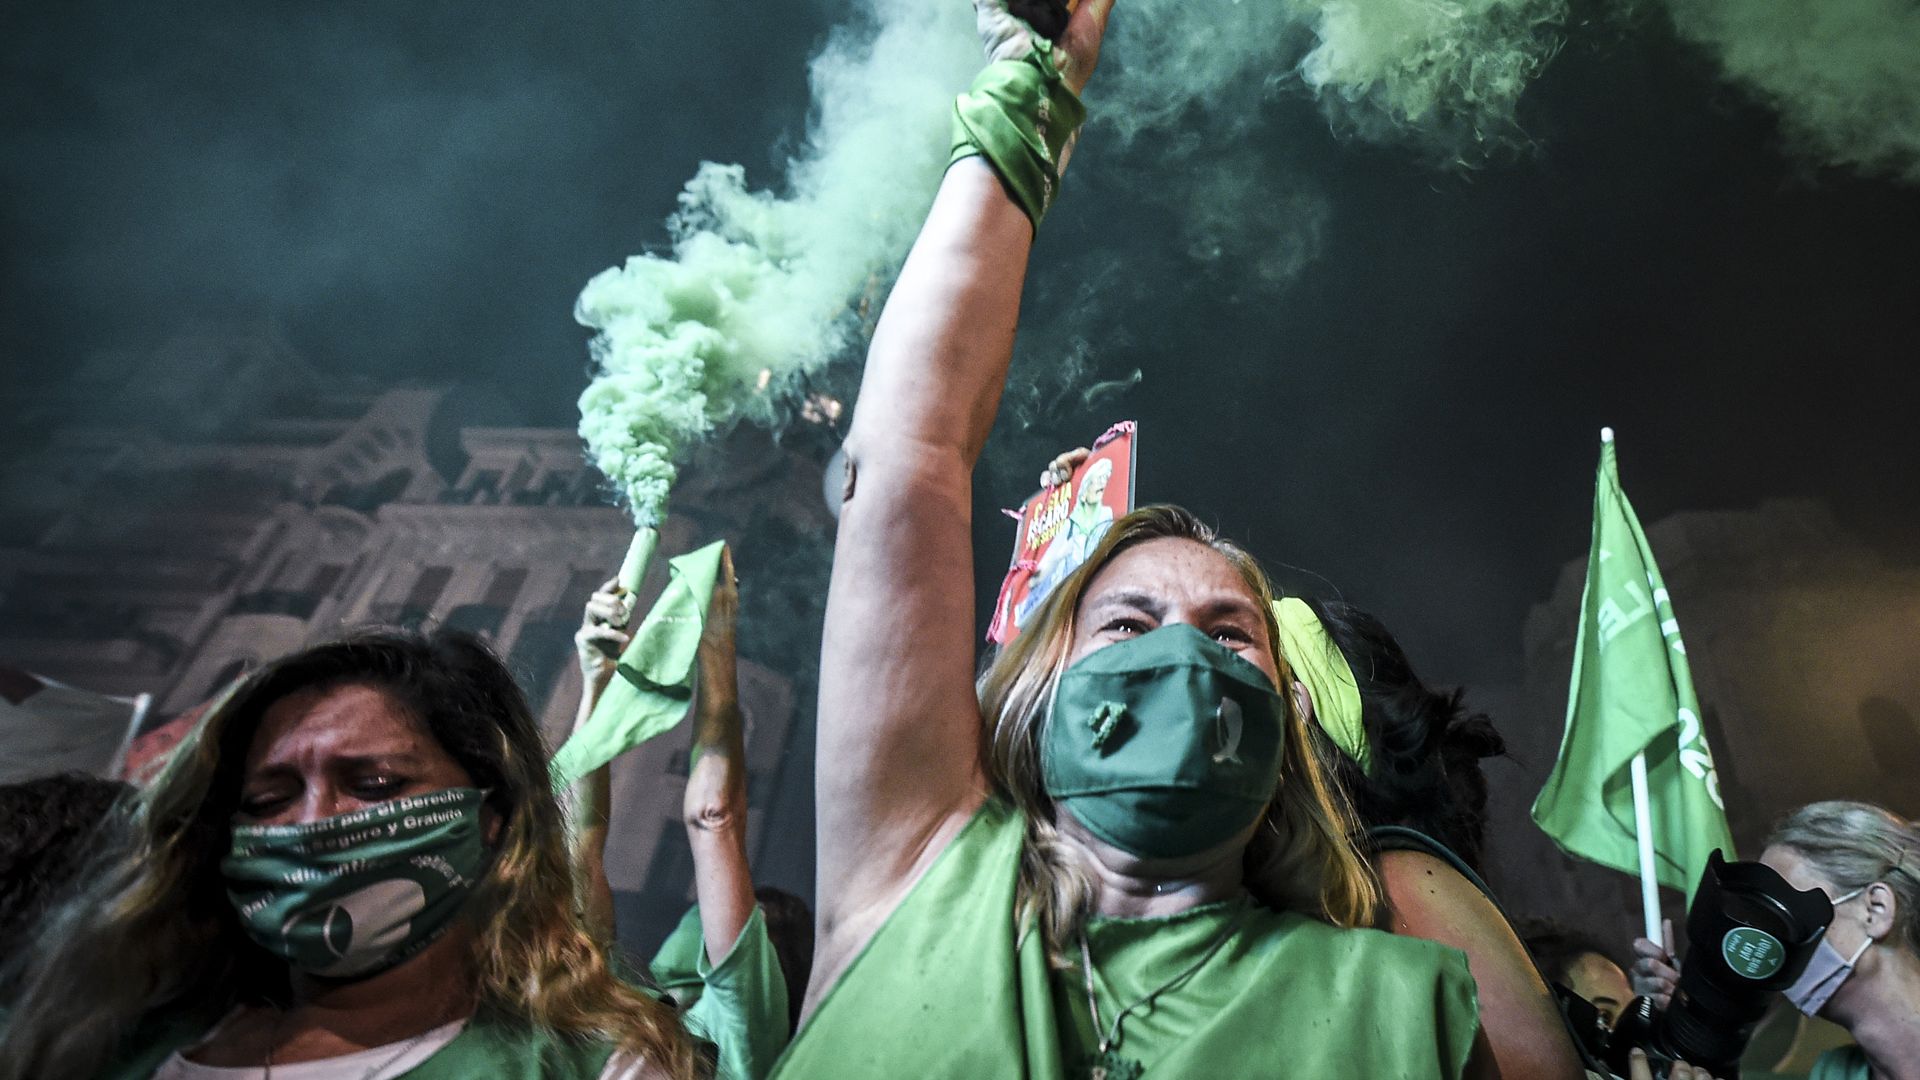 woman in all green clothing and face mask holds up a thing that burns green smoke